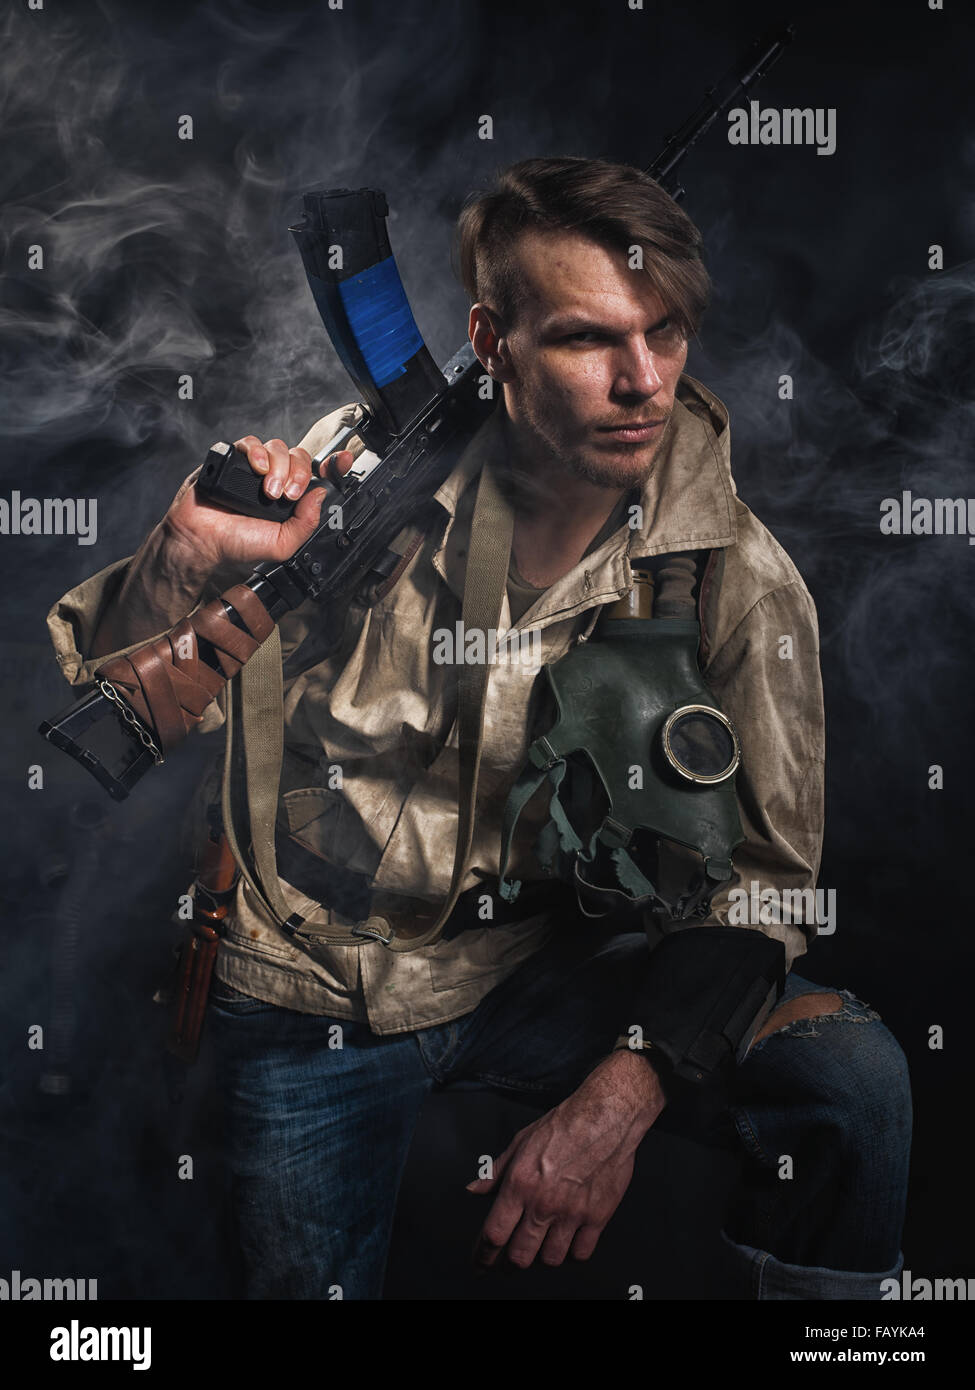 Armed man with a gun. Post-apocalyptic fiction. Stalker. Stock Photo